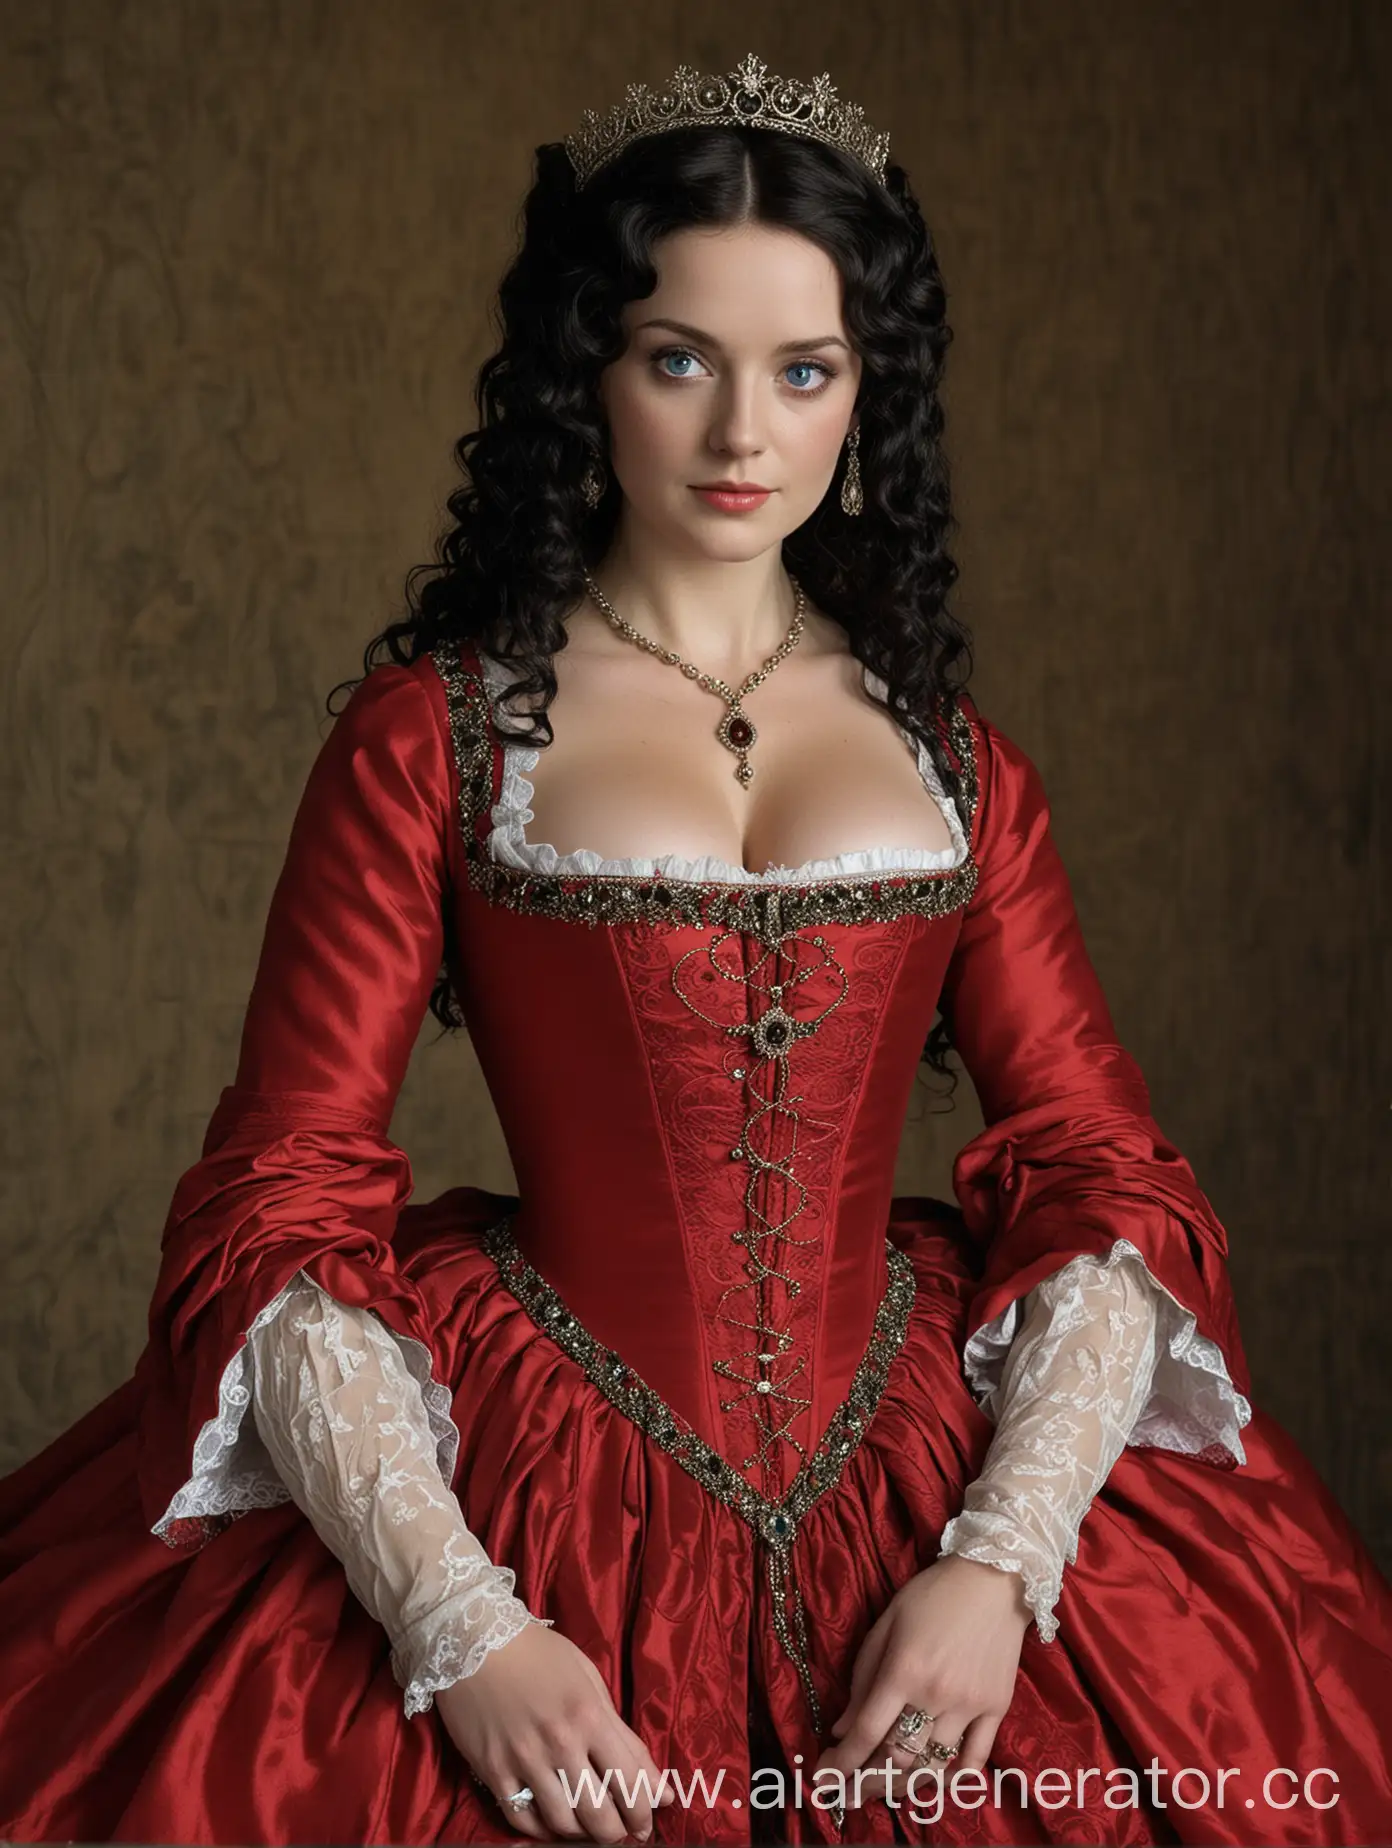 Woman aged 40 she is of English and Irish origin she is 1,65 cm she has blue eyes her long black curly raven hair cascades she has a beautiful shape she is a very pretty woman she has large breasts size E image style 15 century she wears a red floaty skirt and a red bodice style The Tudor and style Anne Boleyn the style of the picture is in the castle of King Henry Viii she was sitting on the throne next to her was King Henry Viii played by the actor Jonathan Rheys Meyers he has blue eyes and black hair